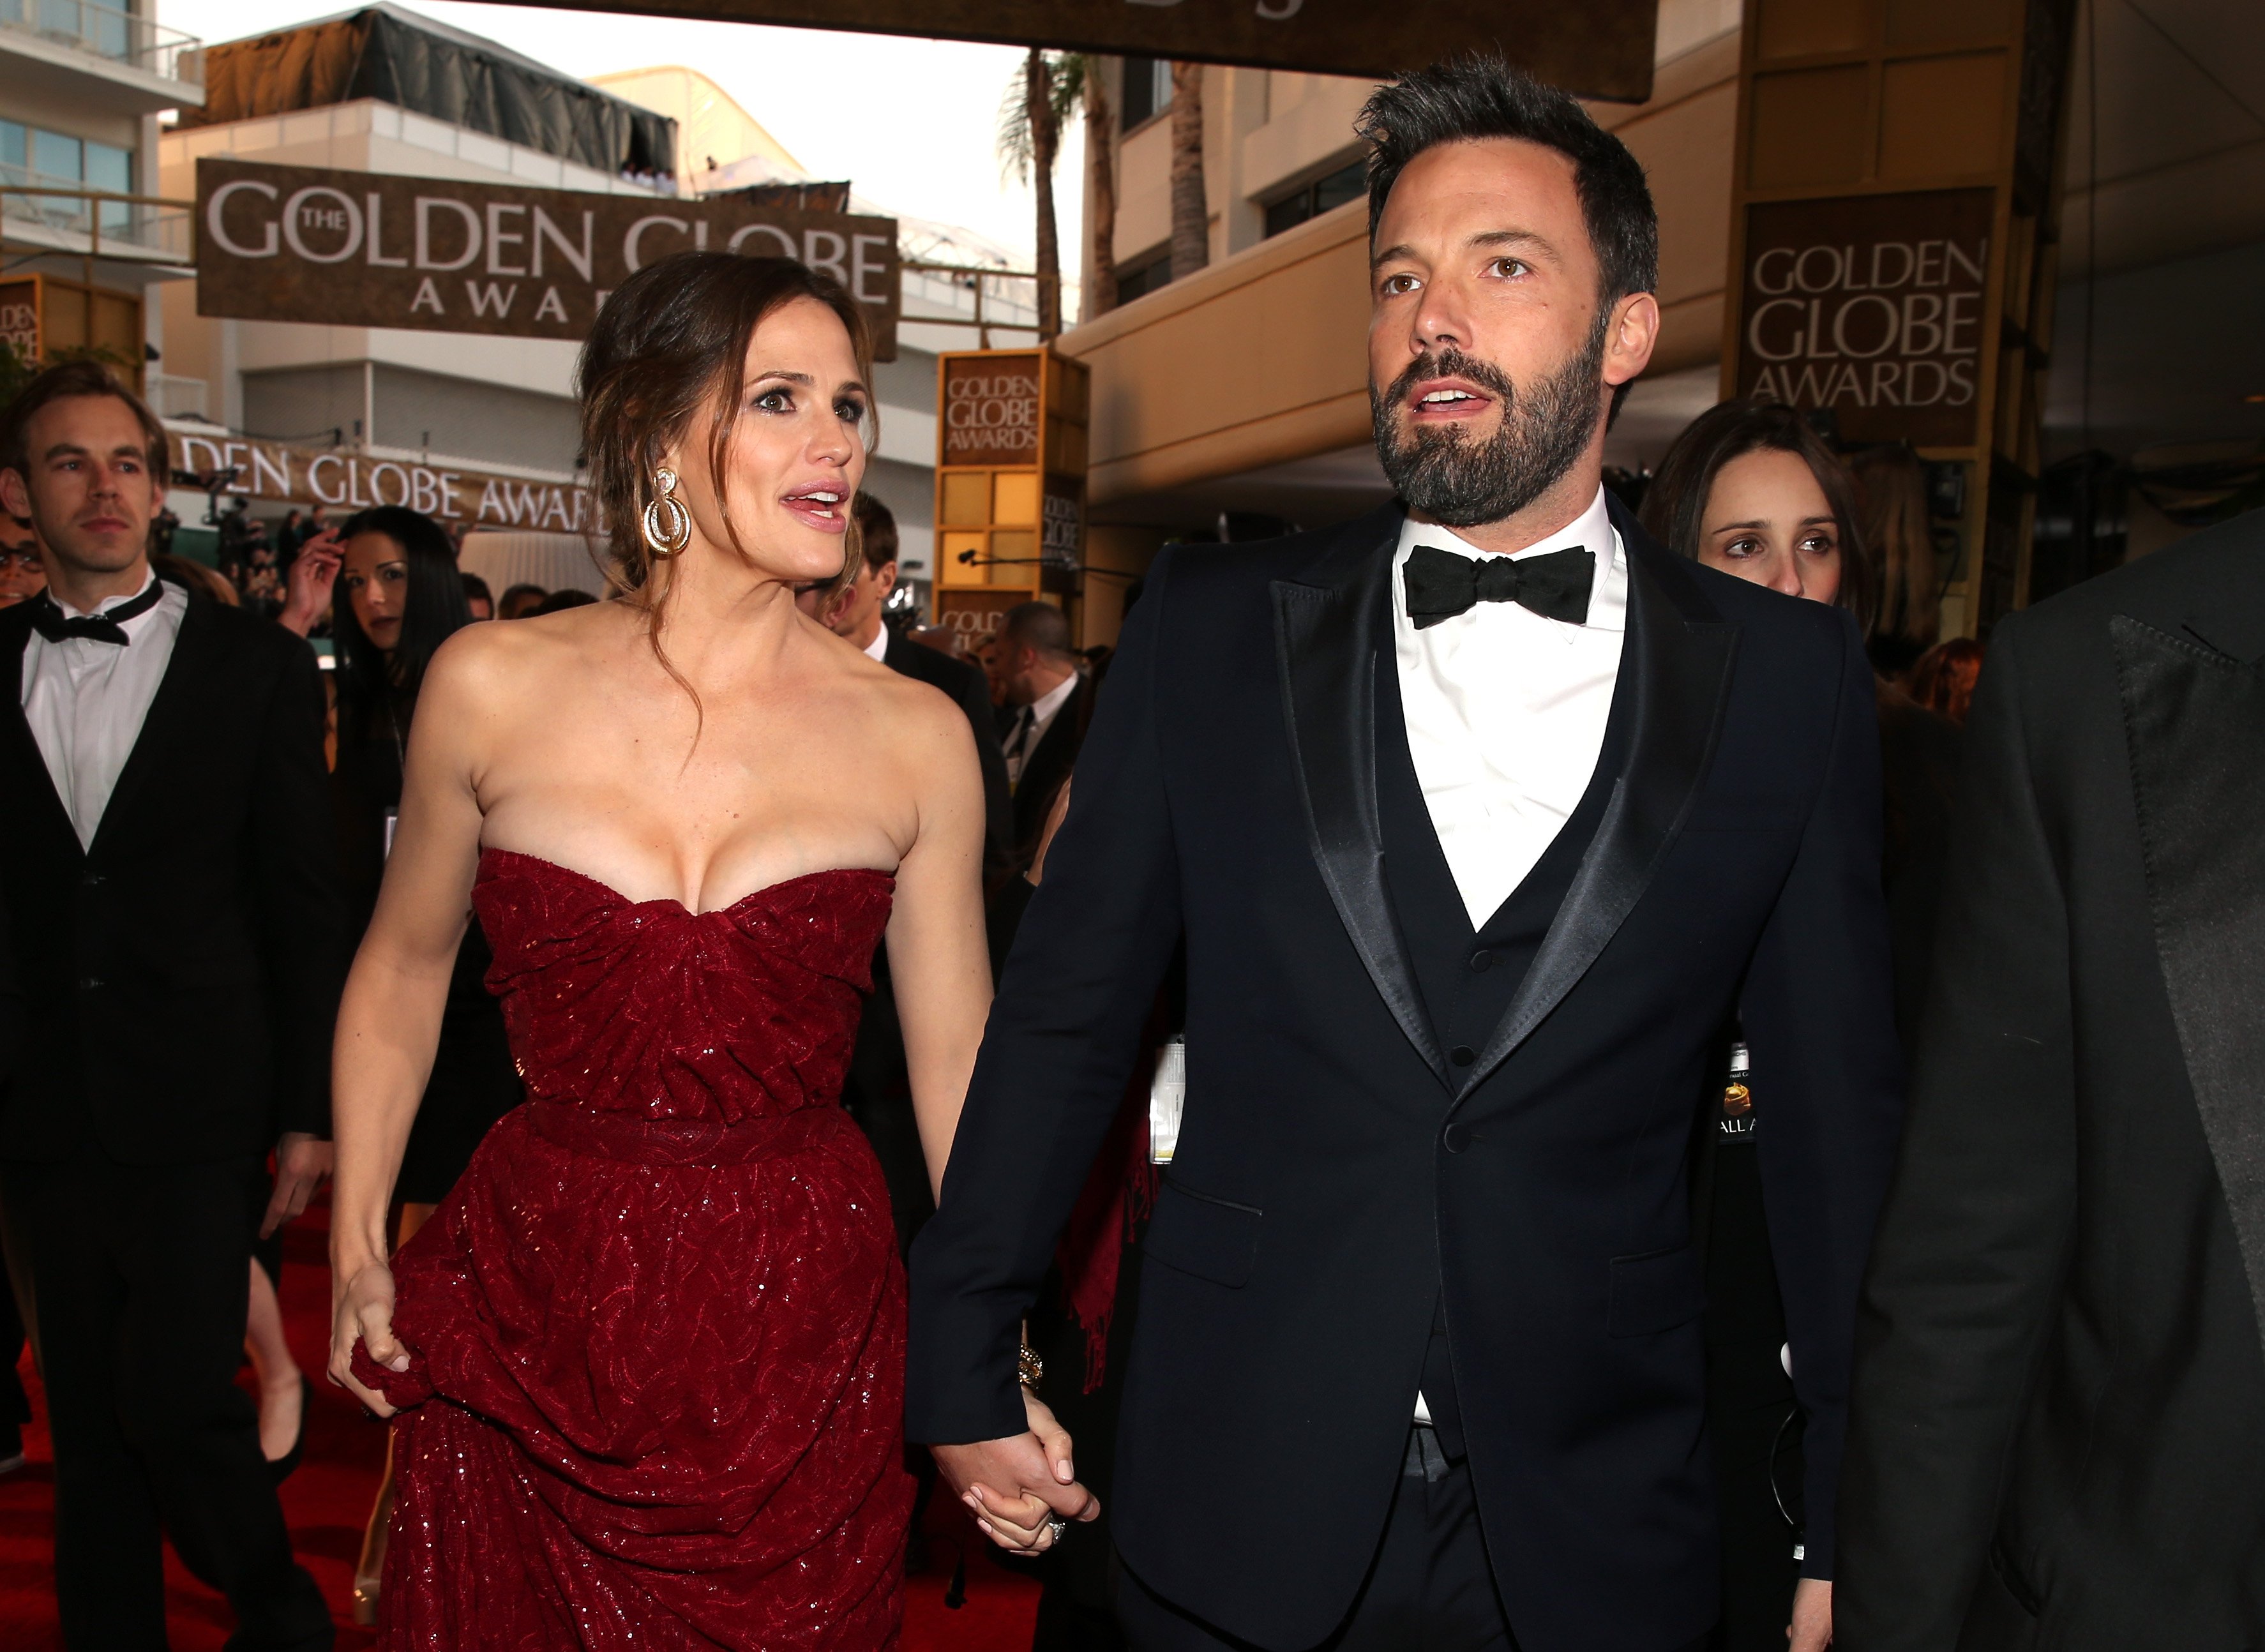 Actor Jennifer Garner and actor/director Ben Affleck arrive to the 70th Annual Golden Globe Awards held at the Beverly Hilton Hotel on January 13, 2013 | Source: Getty Images